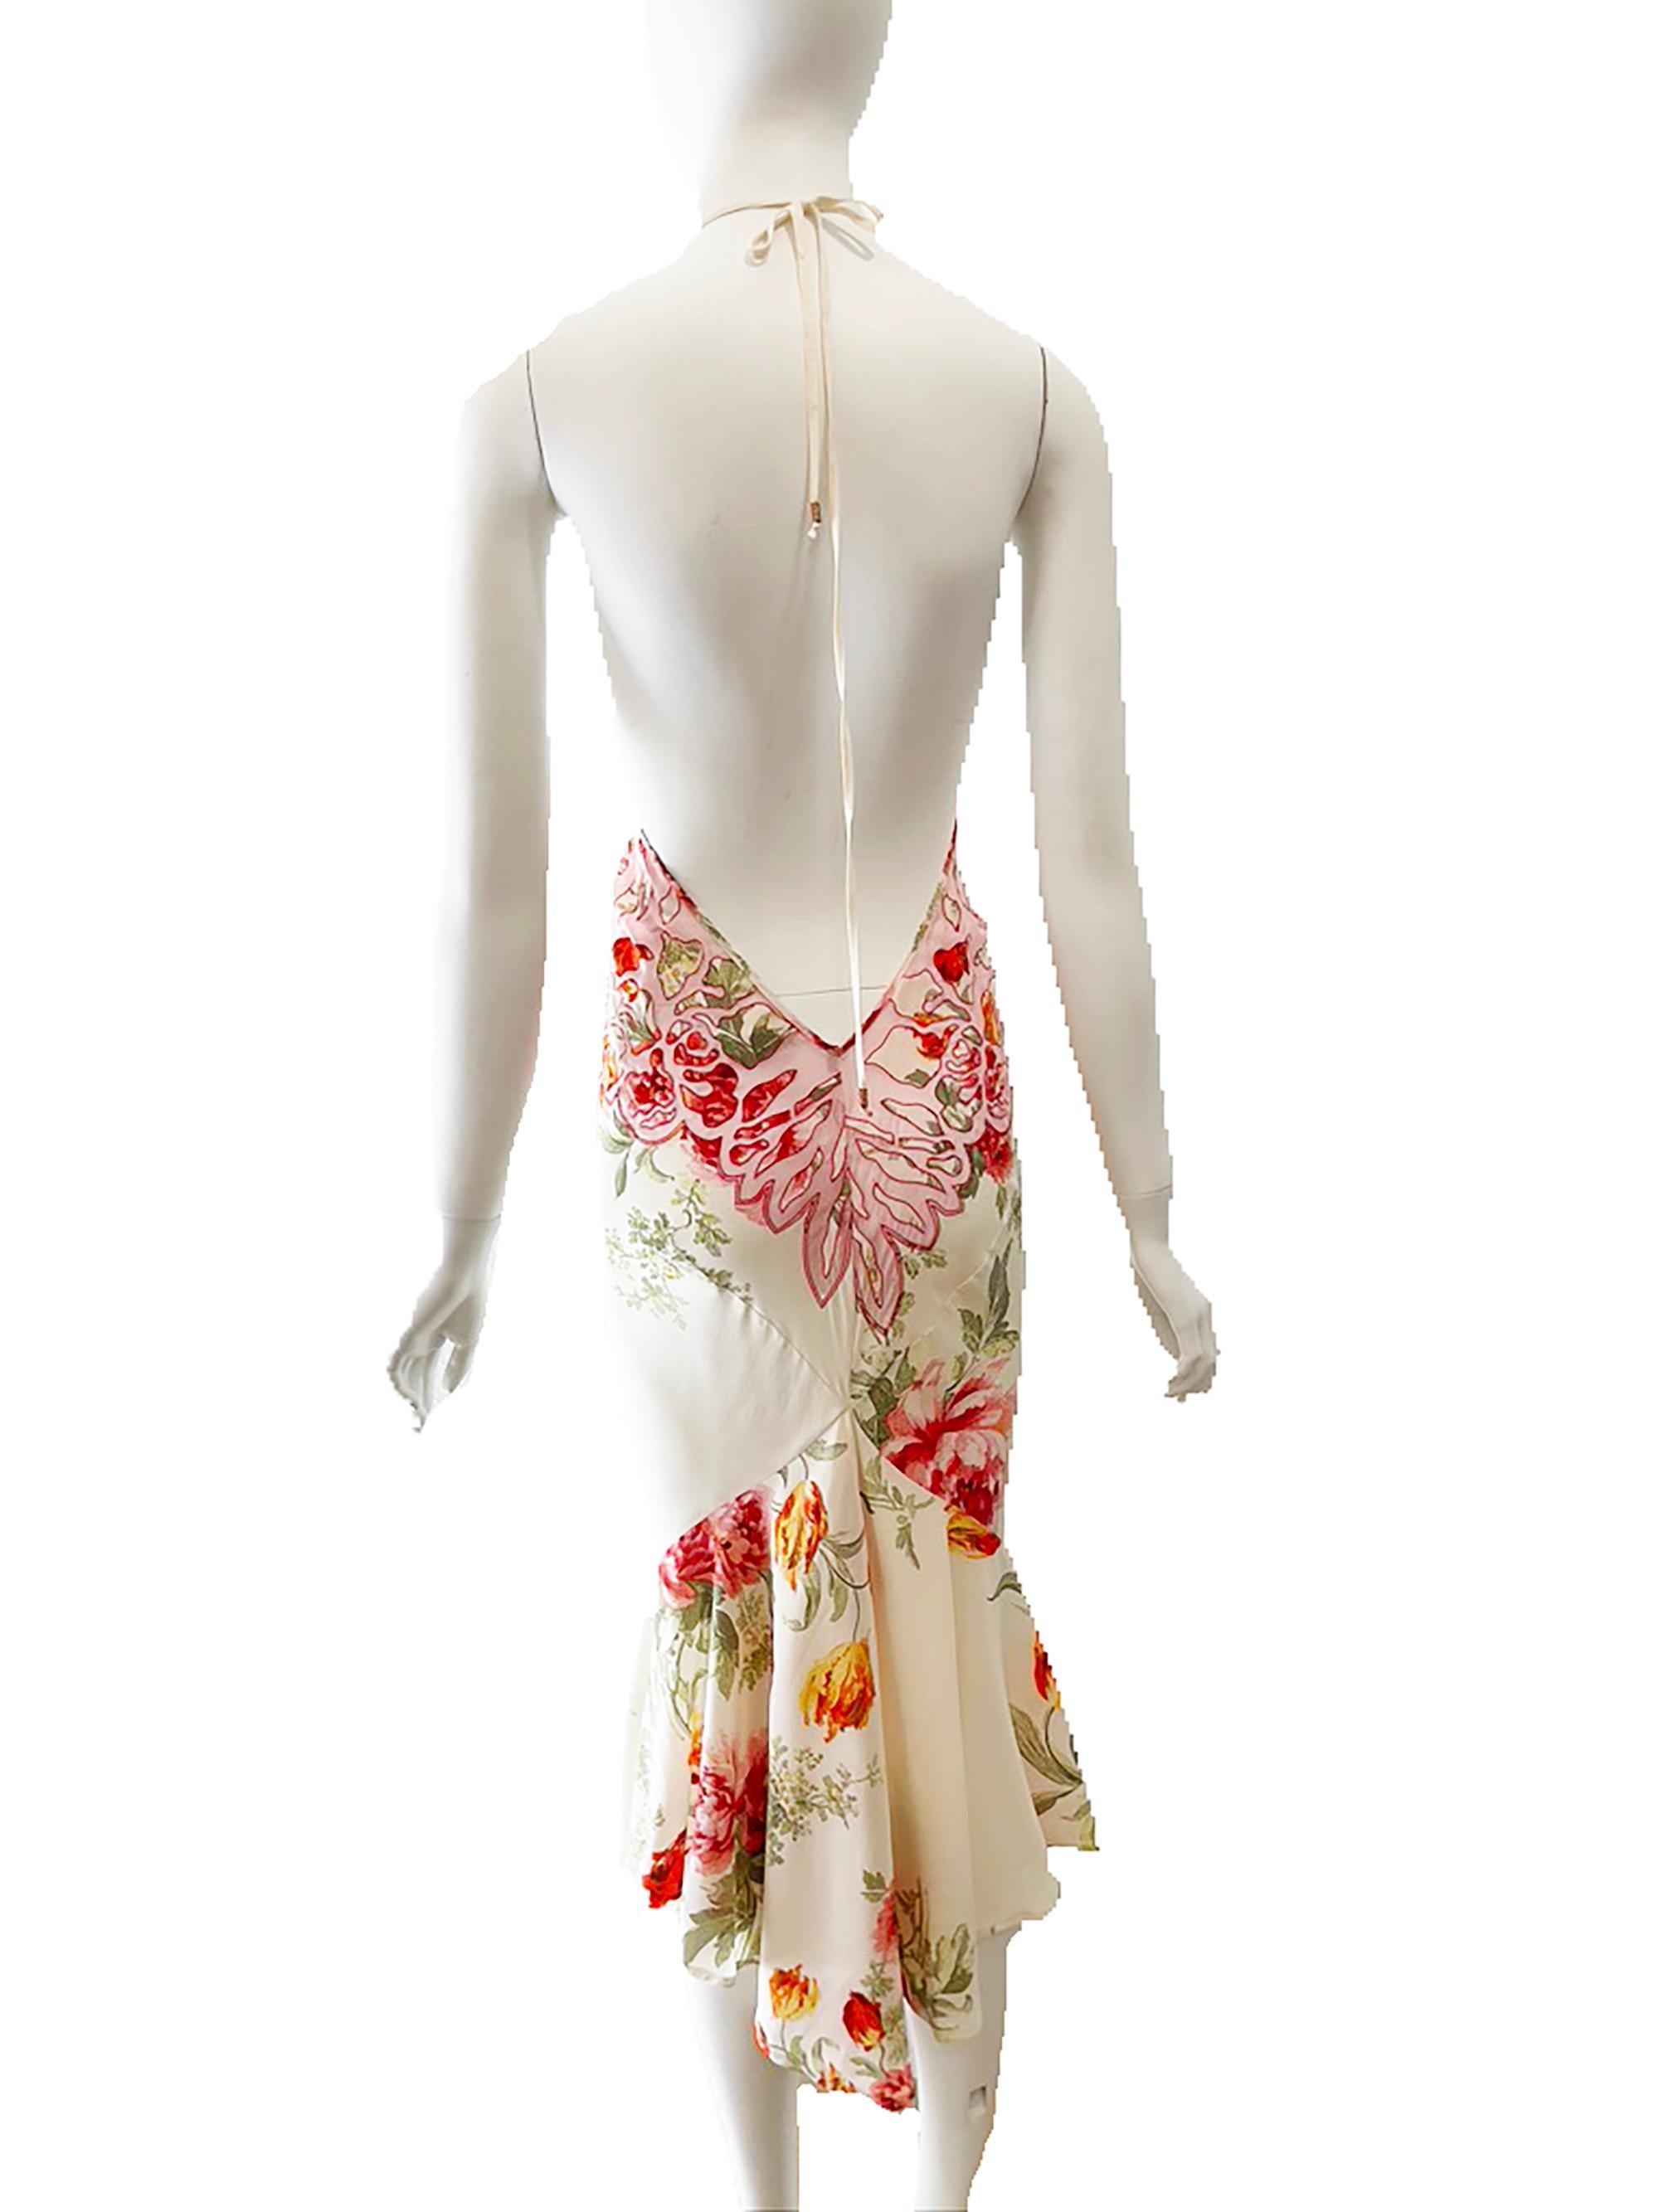 S/S 2002 Roberto Cavalli Sheer Floral Silk Backless Dress In Good Condition For Sale In Austin, TX